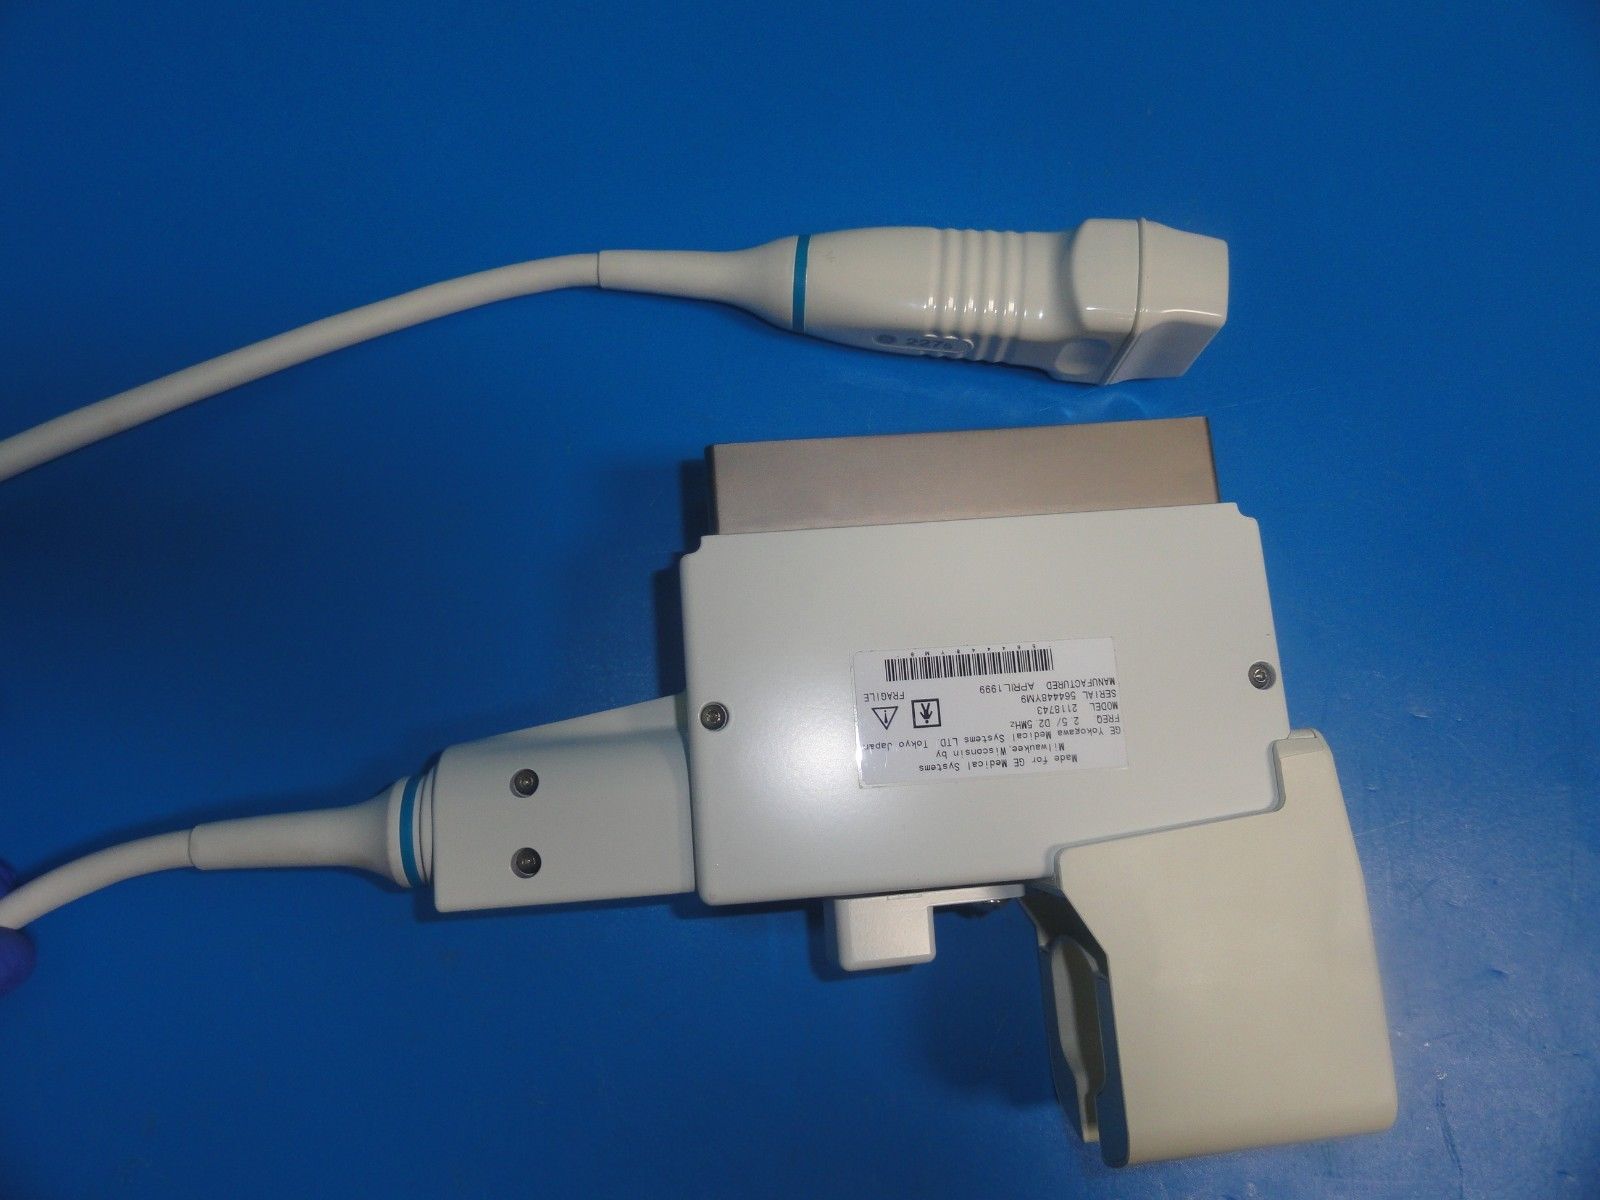 GE 227s P/N  2118743 Phased Array 2-4 MHz  Probe W/ Hook for GE Logiq 700 (5979 DIAGNOSTIC ULTRASOUND MACHINES FOR SALE